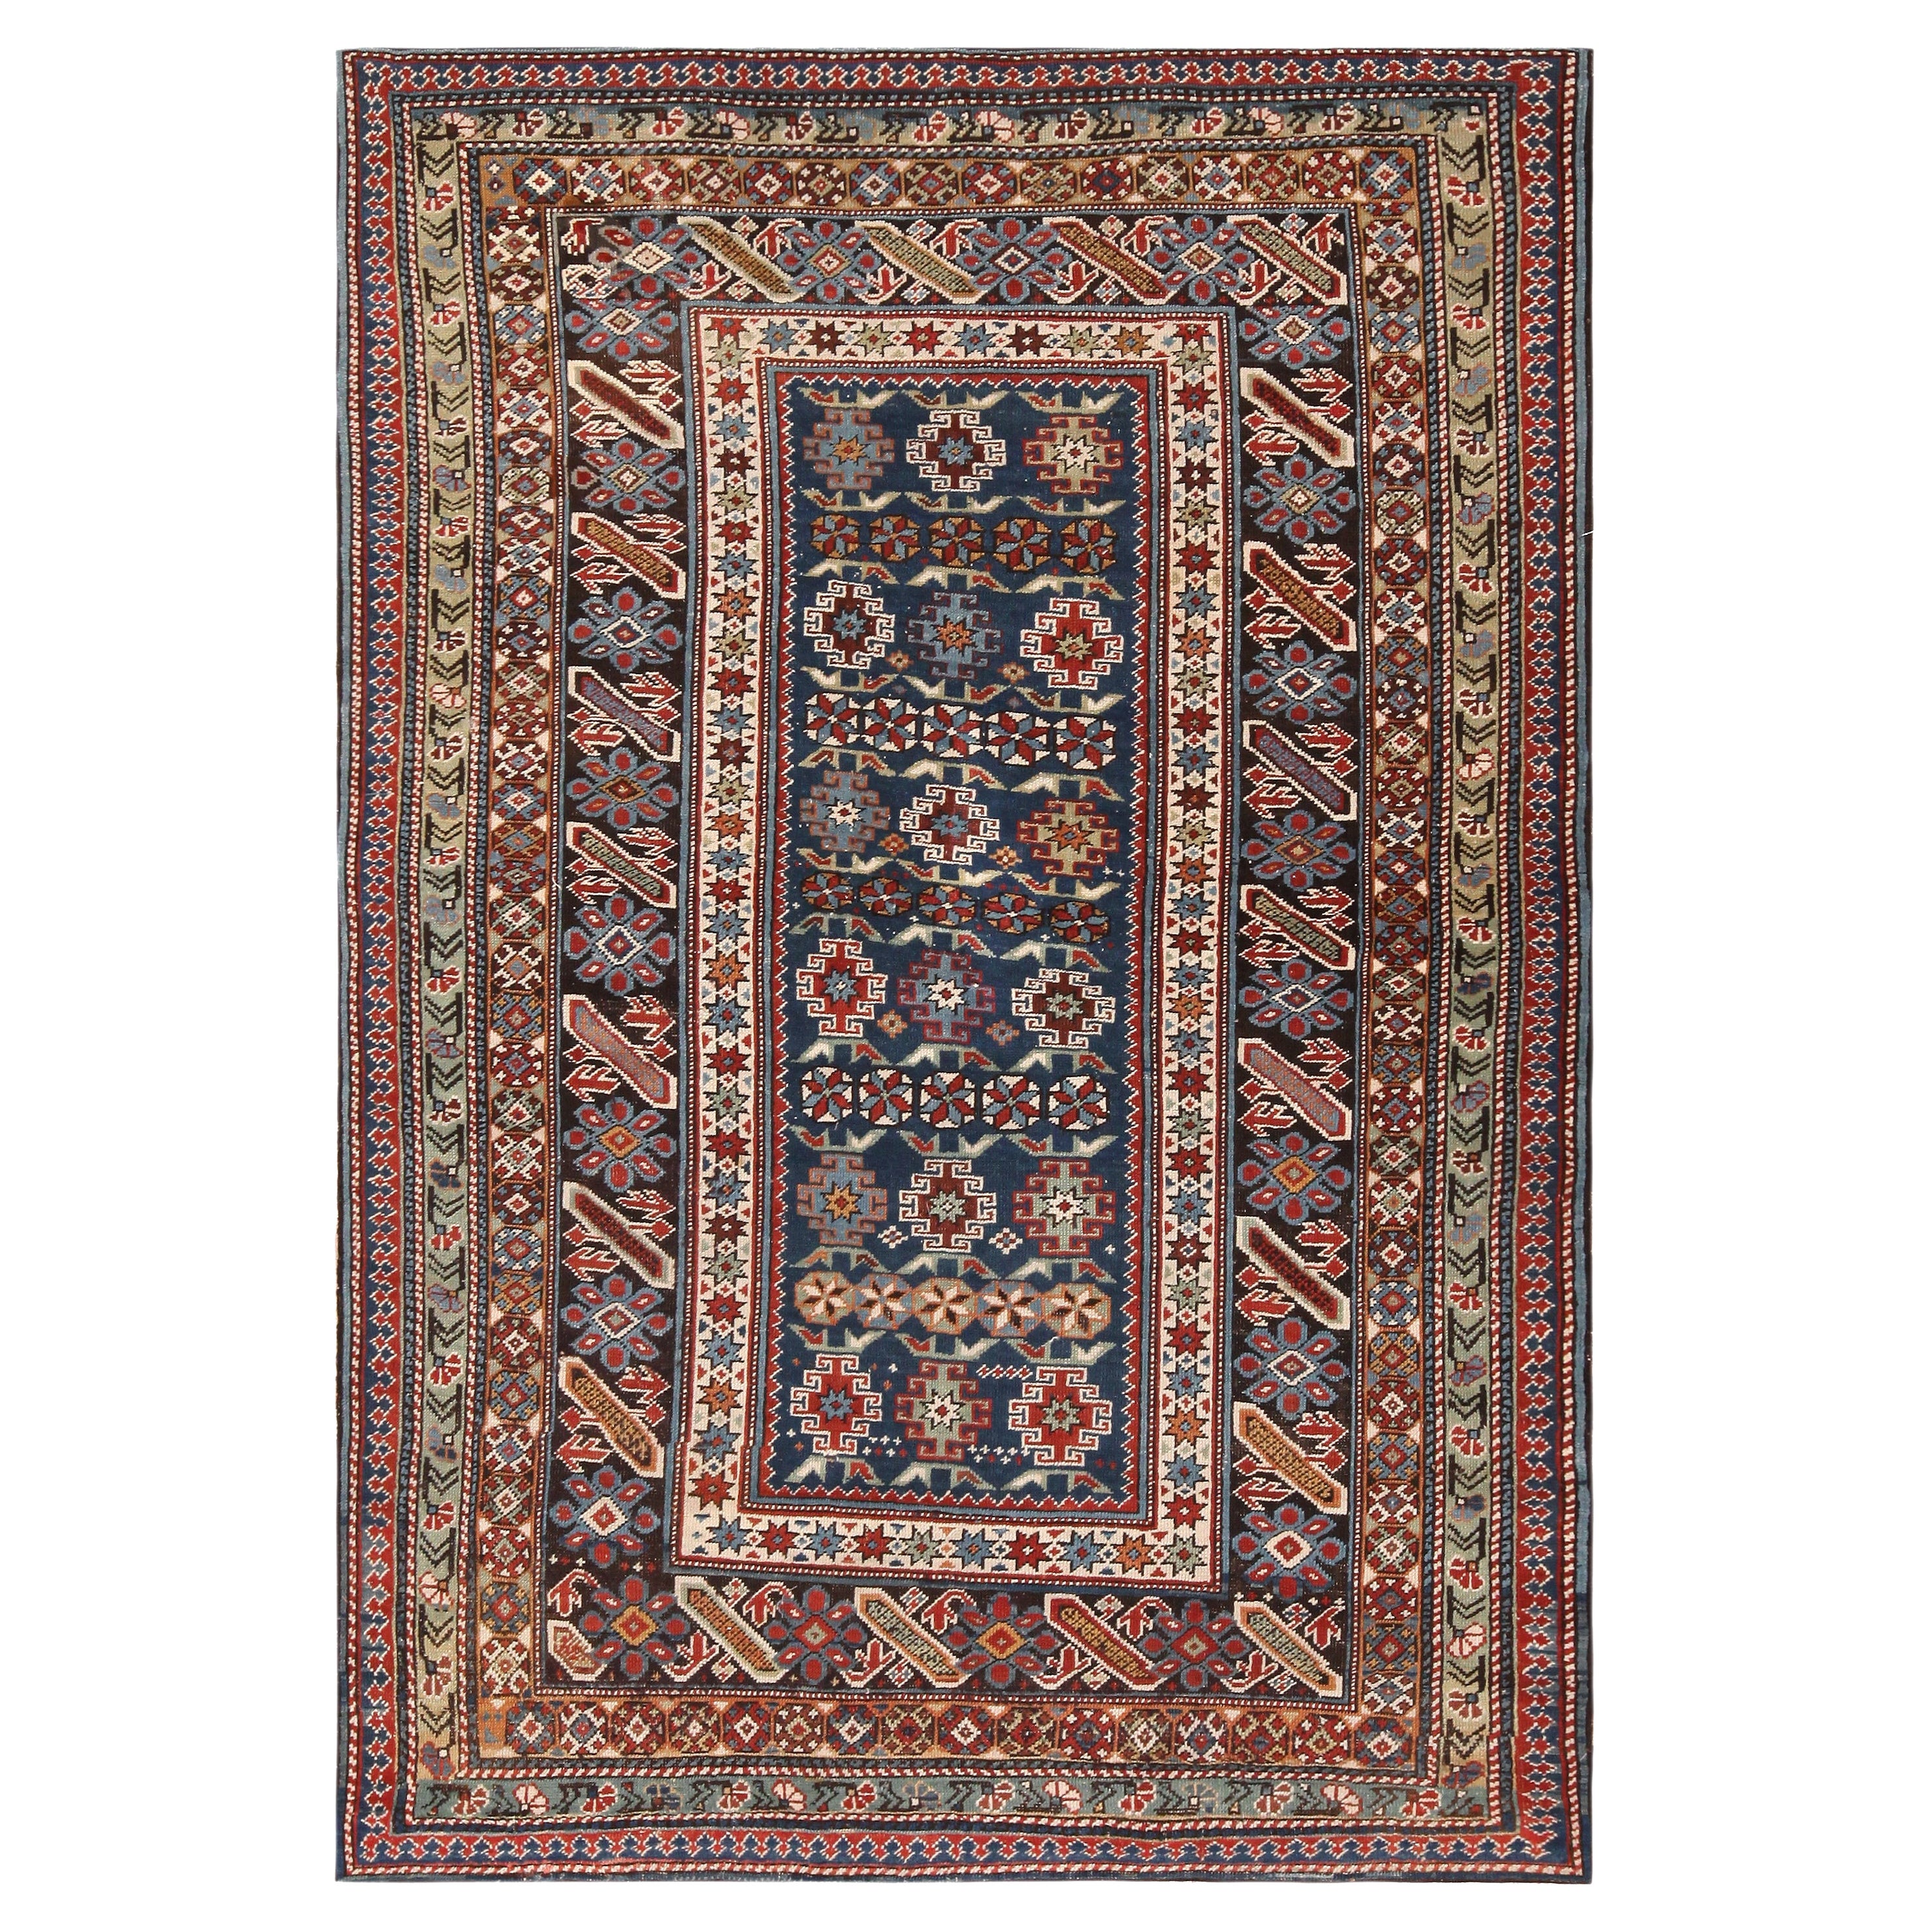 Nazmiyal Collection Antique Caucasian Chi Chi Rug. 4 ft x 6 ft 1 in